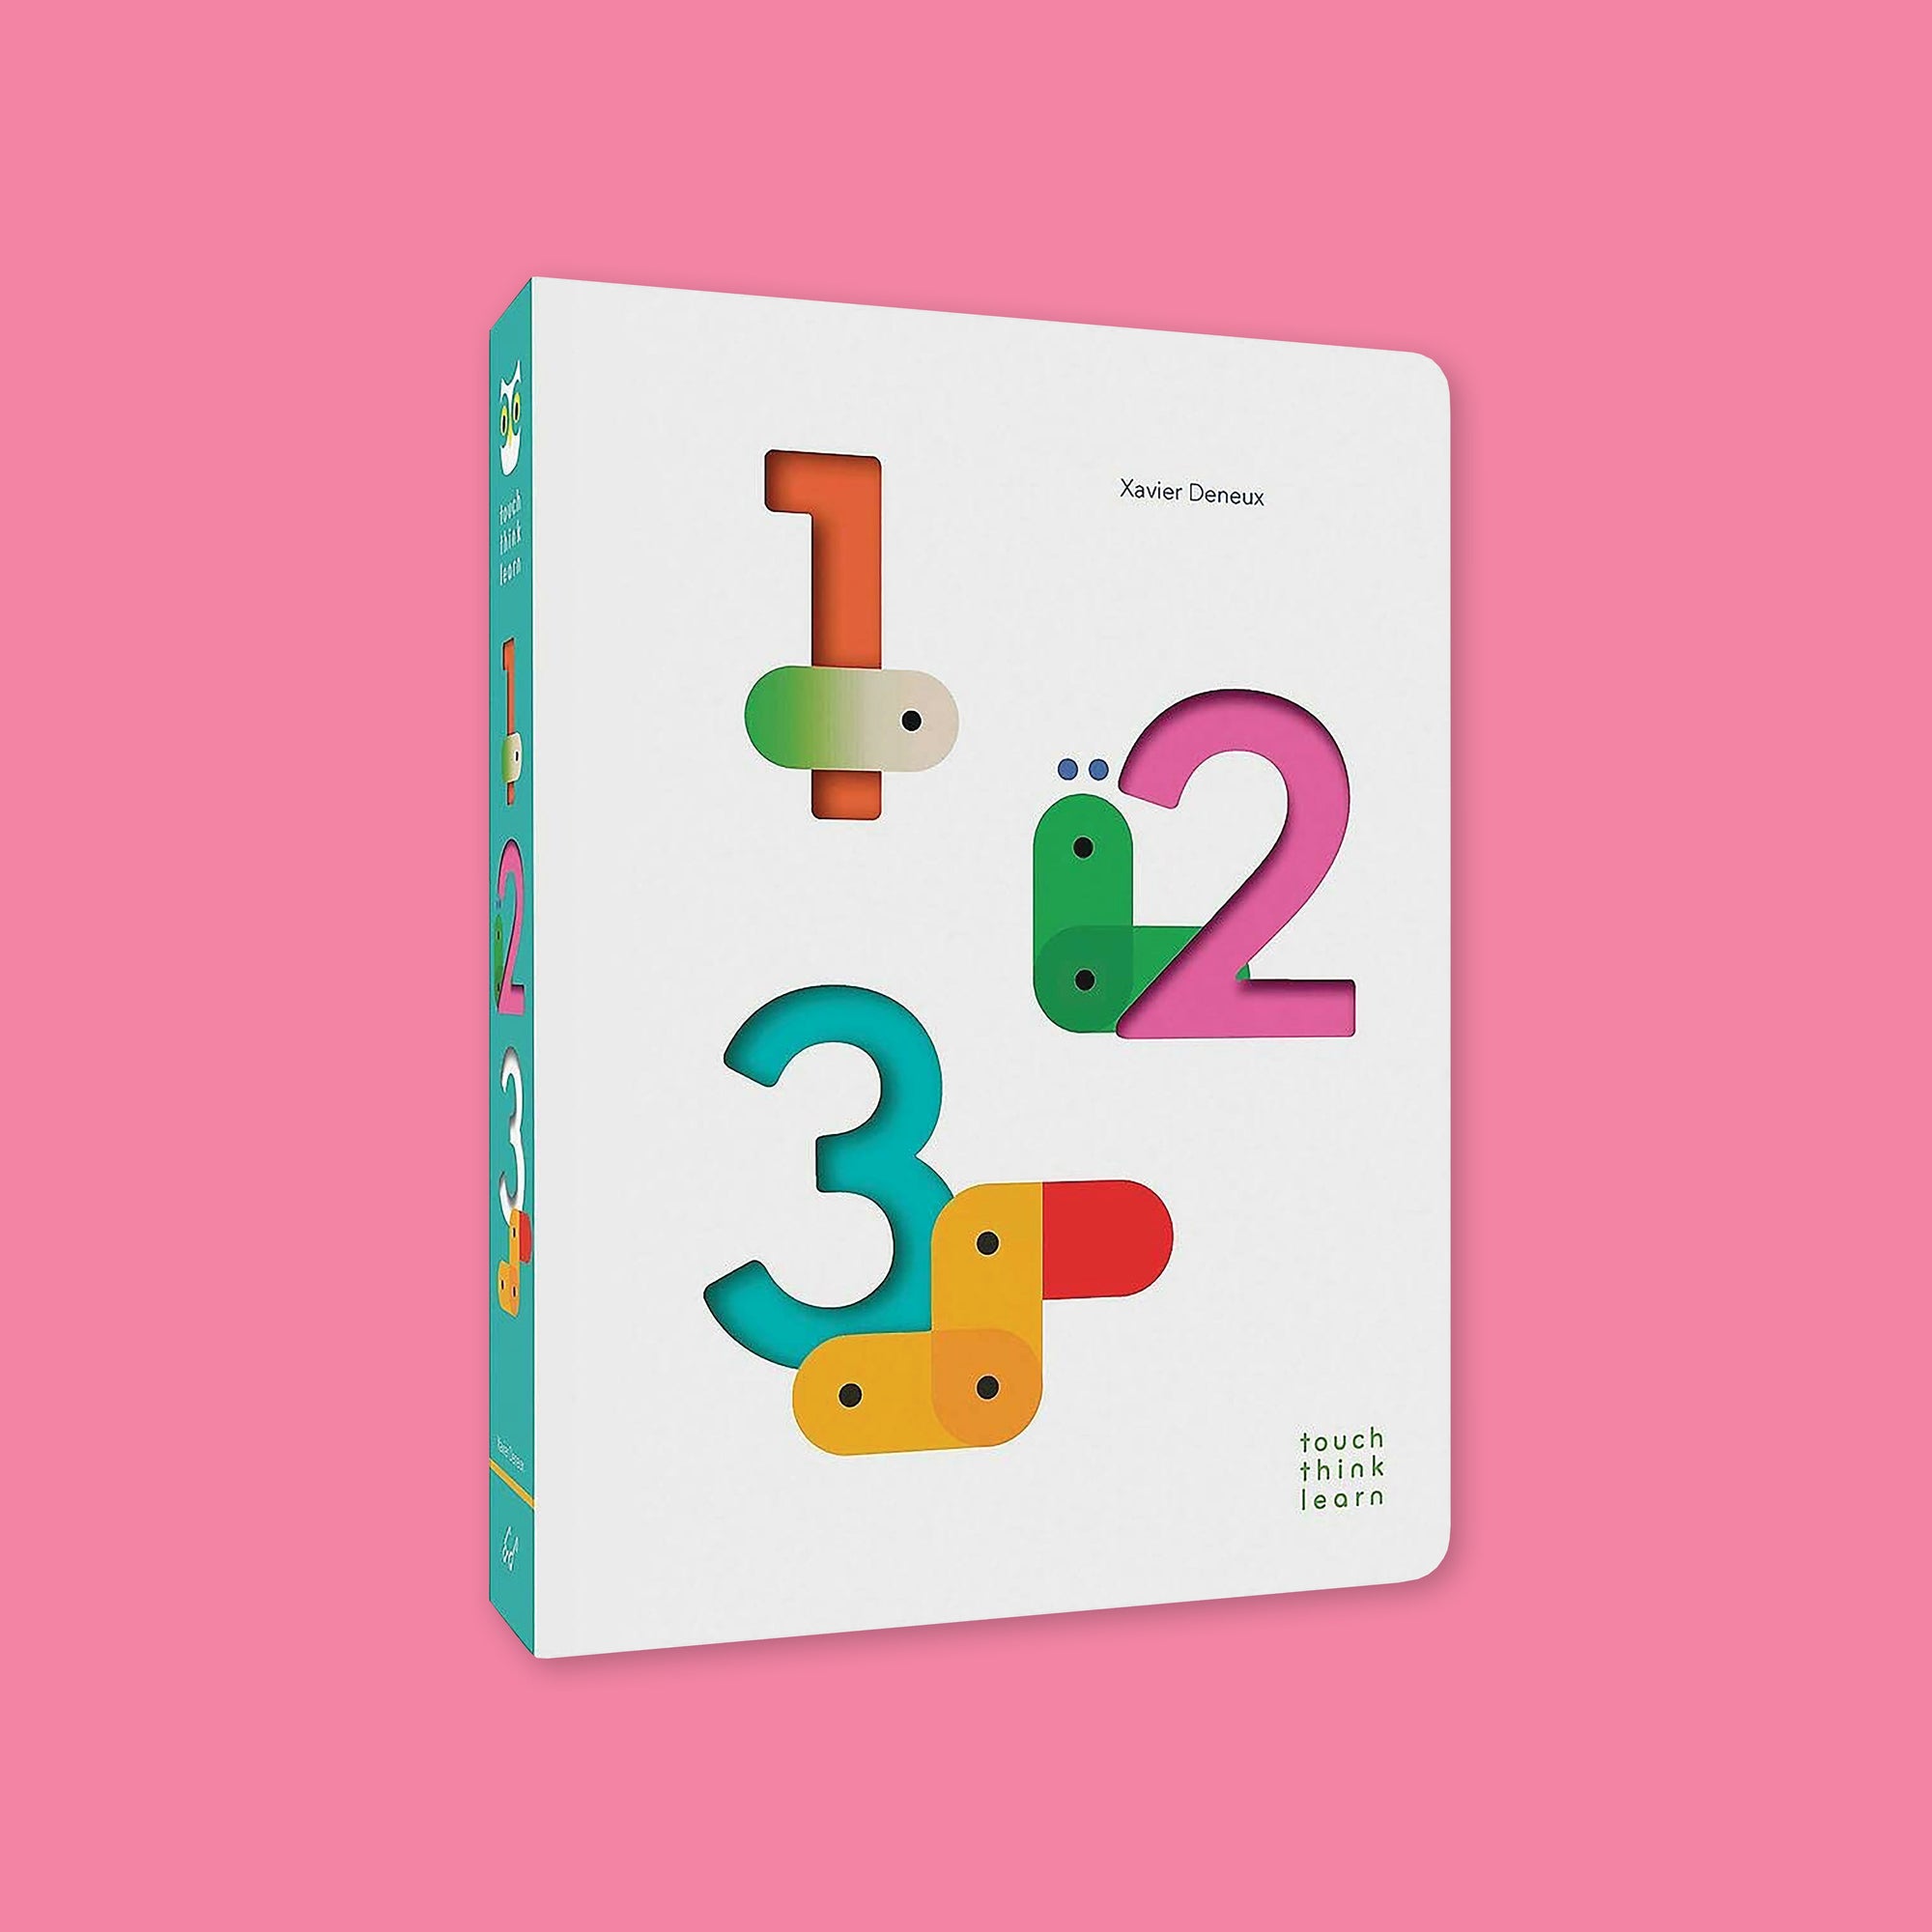 On a bubblegum pink background sits a book. This book features the colorful 1-2-3 "Touch-Think-Learn" board book by Xavier Deneux.